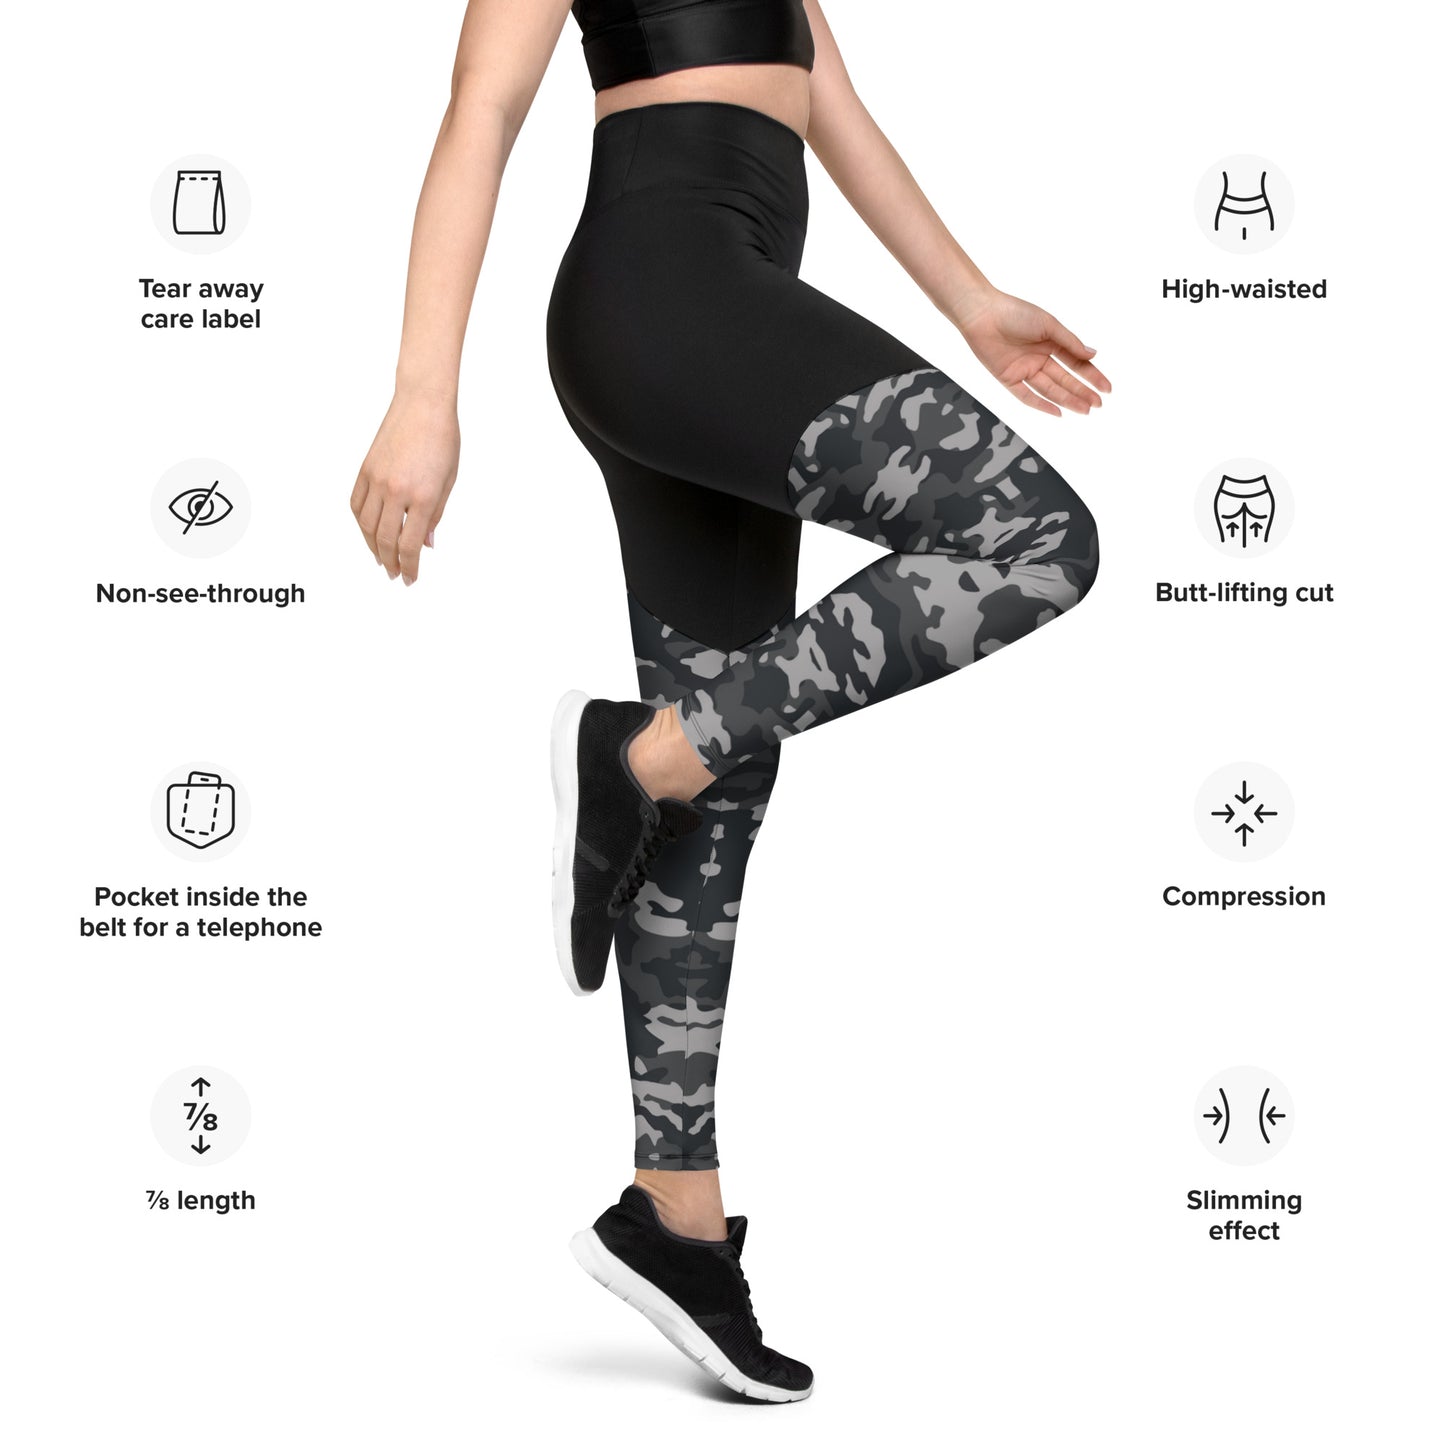 Army2075 - Sports Leggings: High waisted, double layered belt, butt-lifting cut, Slimming effect